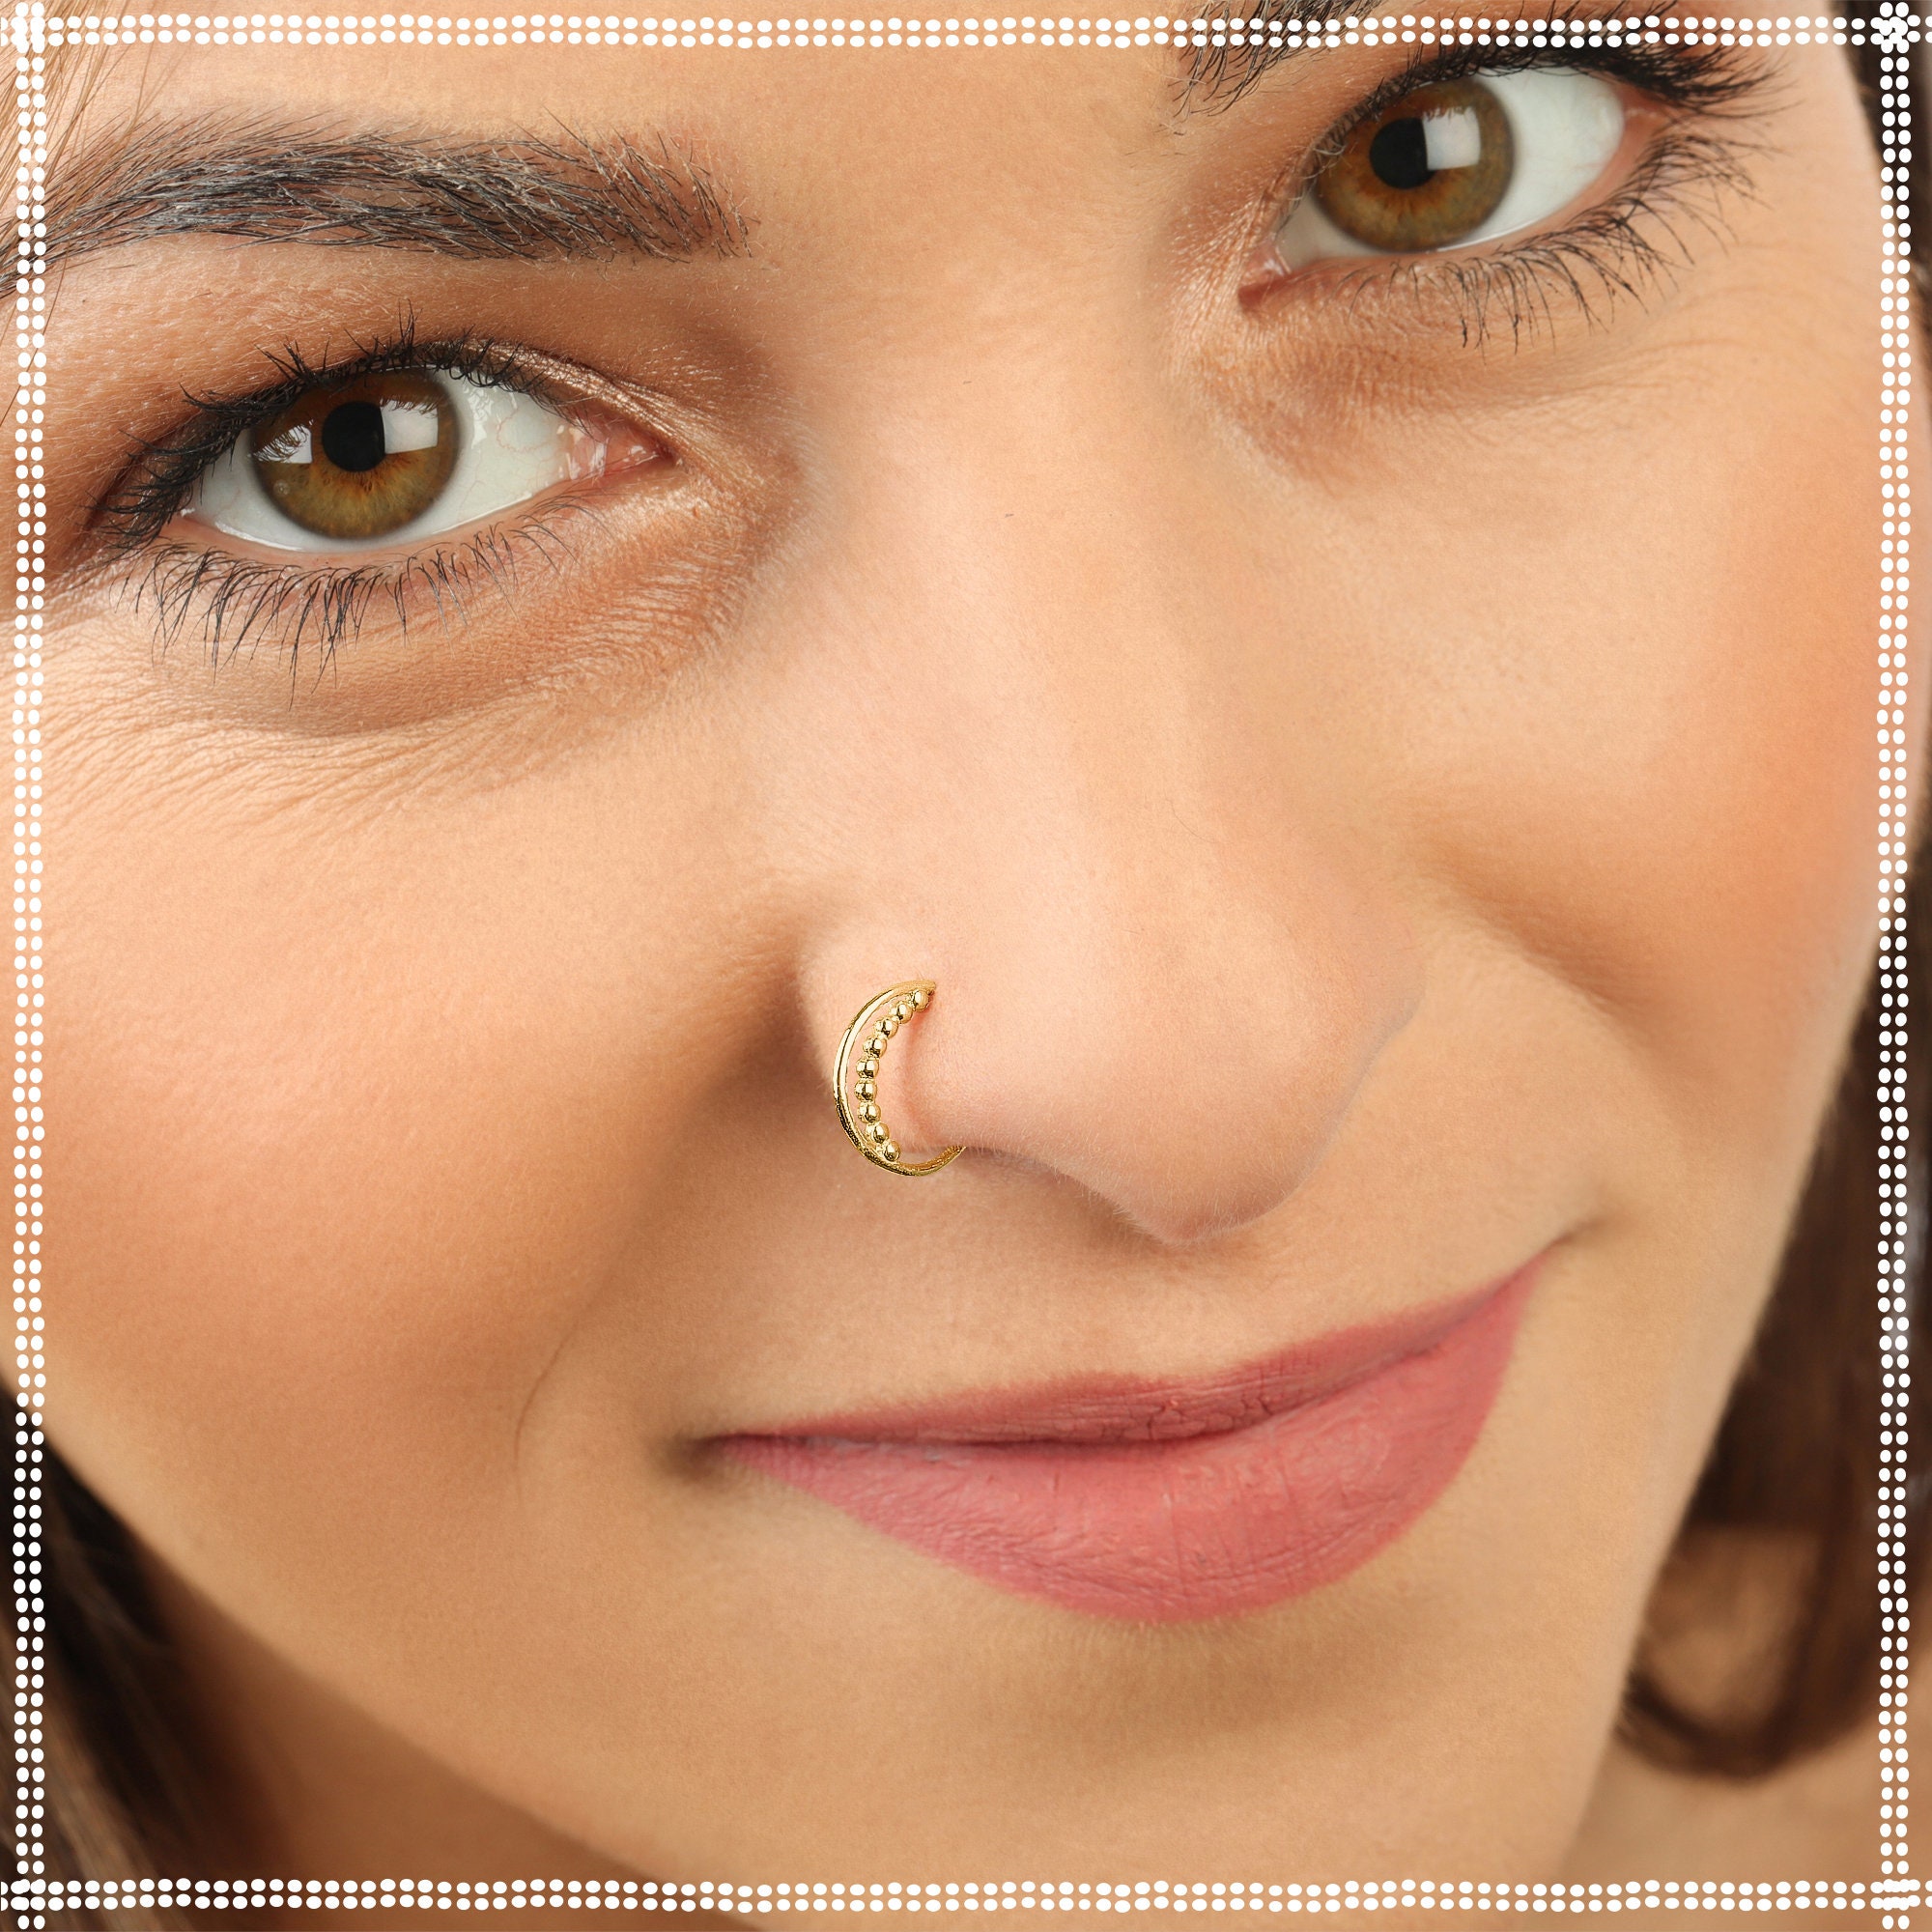 High Quality Gold Nose Rings